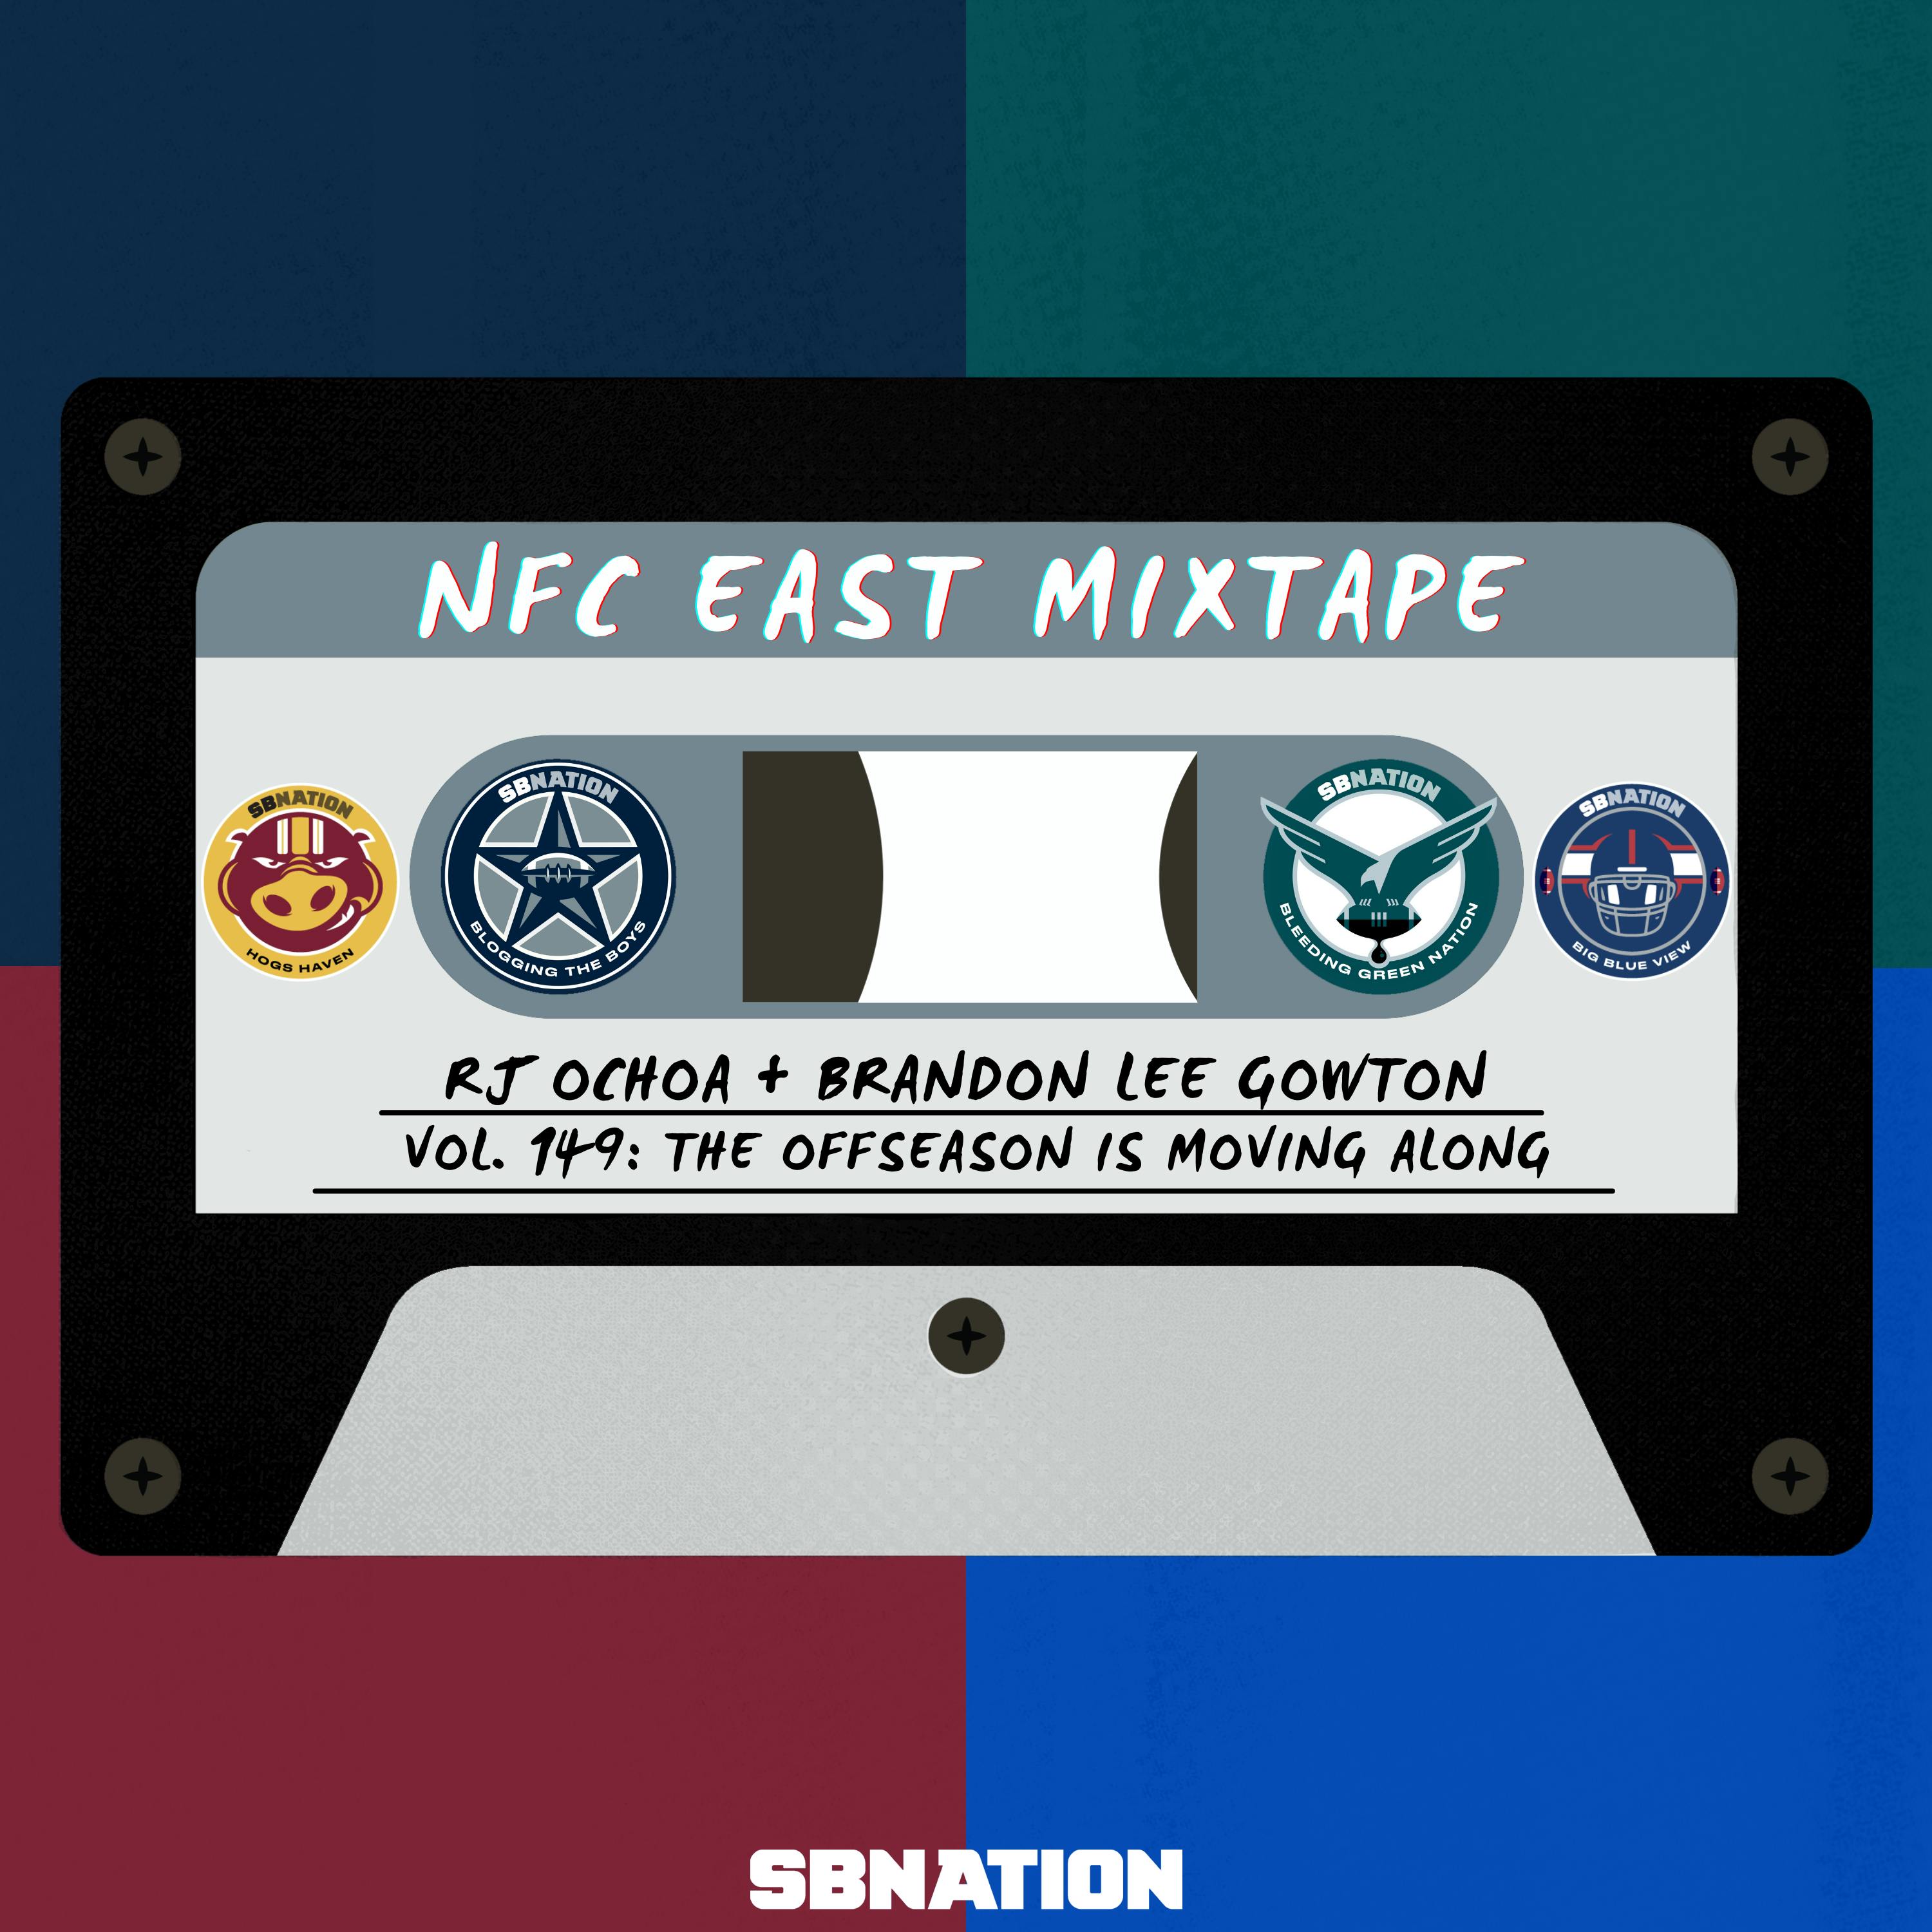 NFC East Mixtape Vol. 149: The offseason is moving along